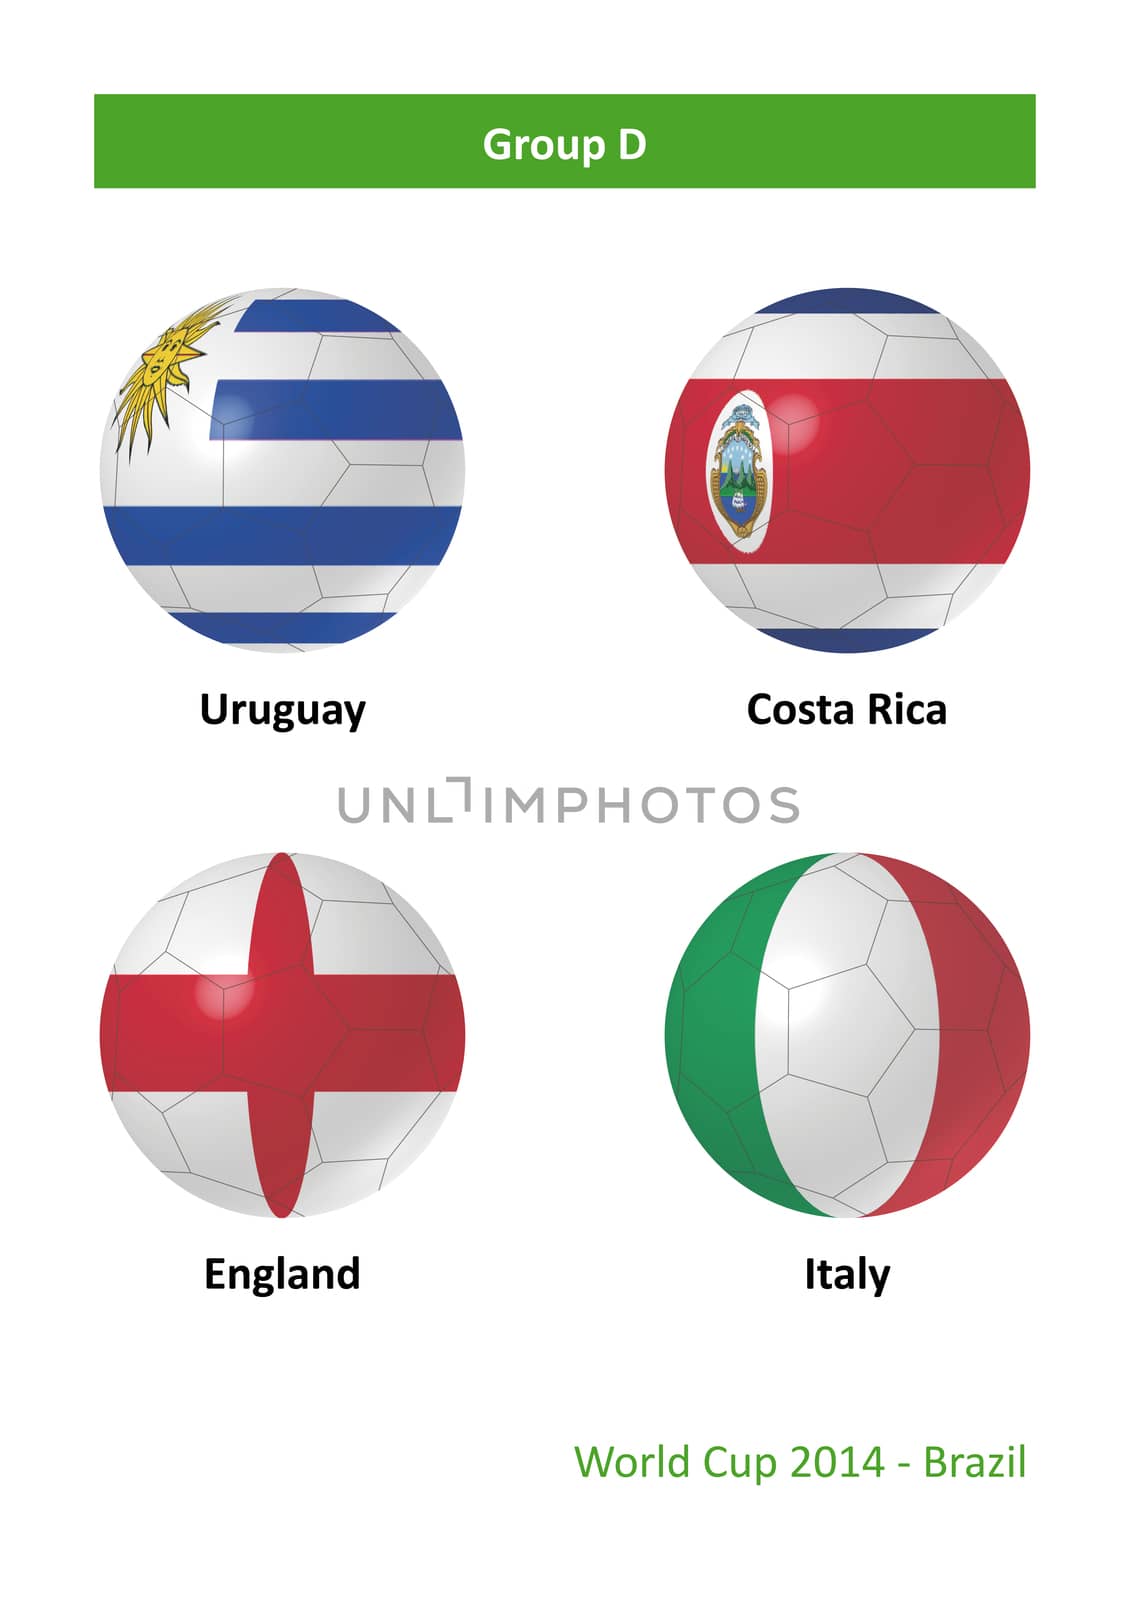 3D soccer balls with group D country flags World Cup Football Brazil 2014